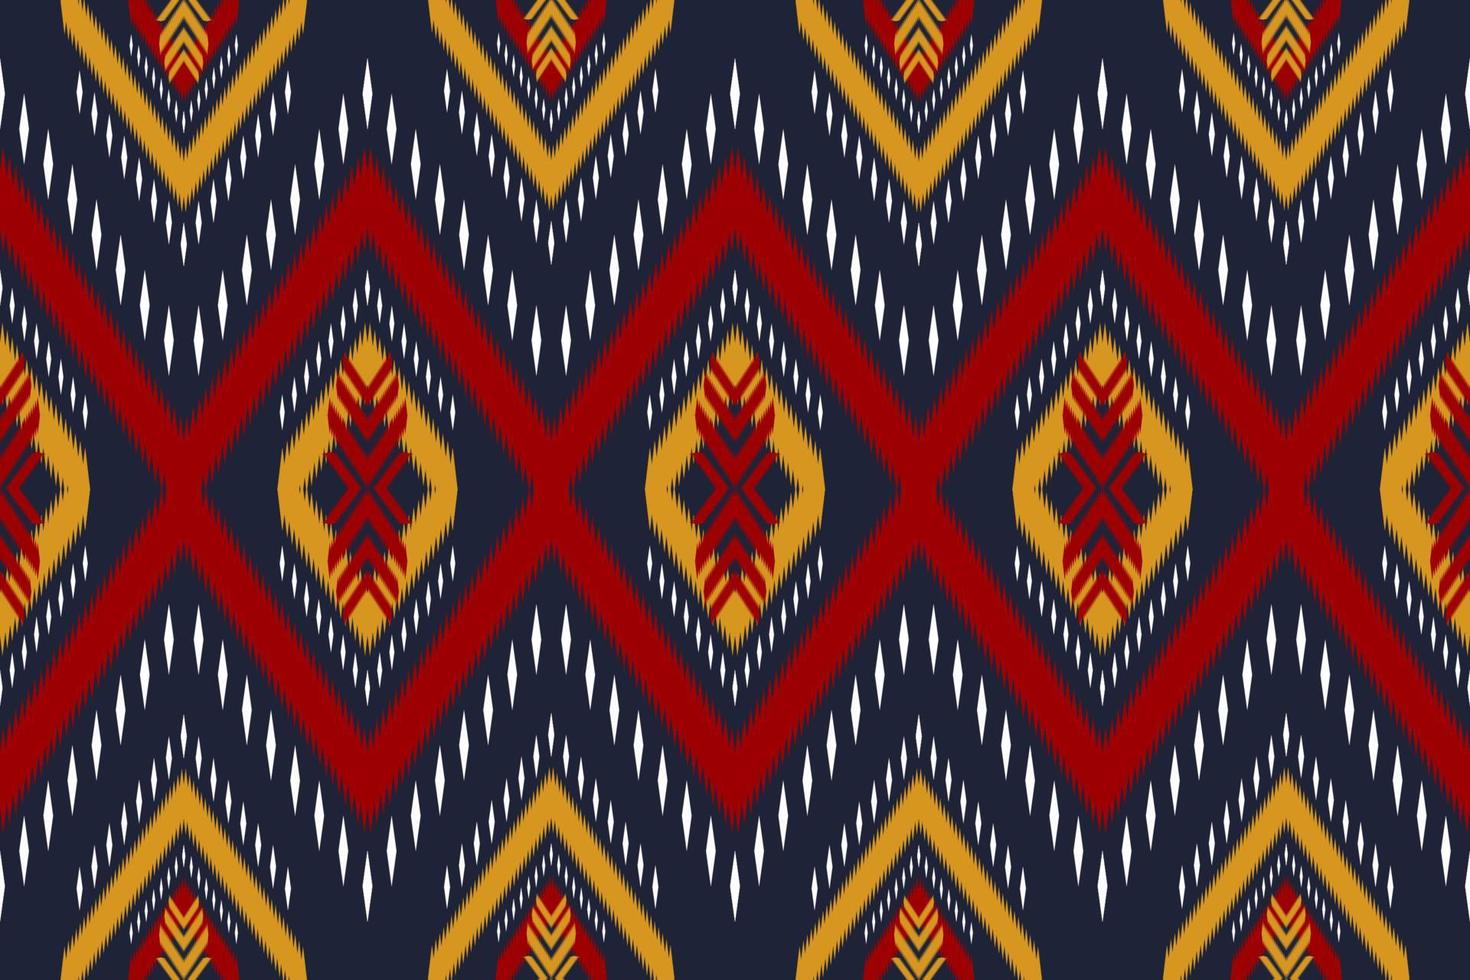 Abstract ethnic pattern art. Ikat seamless pattern in tribal, folk embroidery, and Mexican style. Design for background, wallpaper, vector illustration, fabric, clothing, carpet.